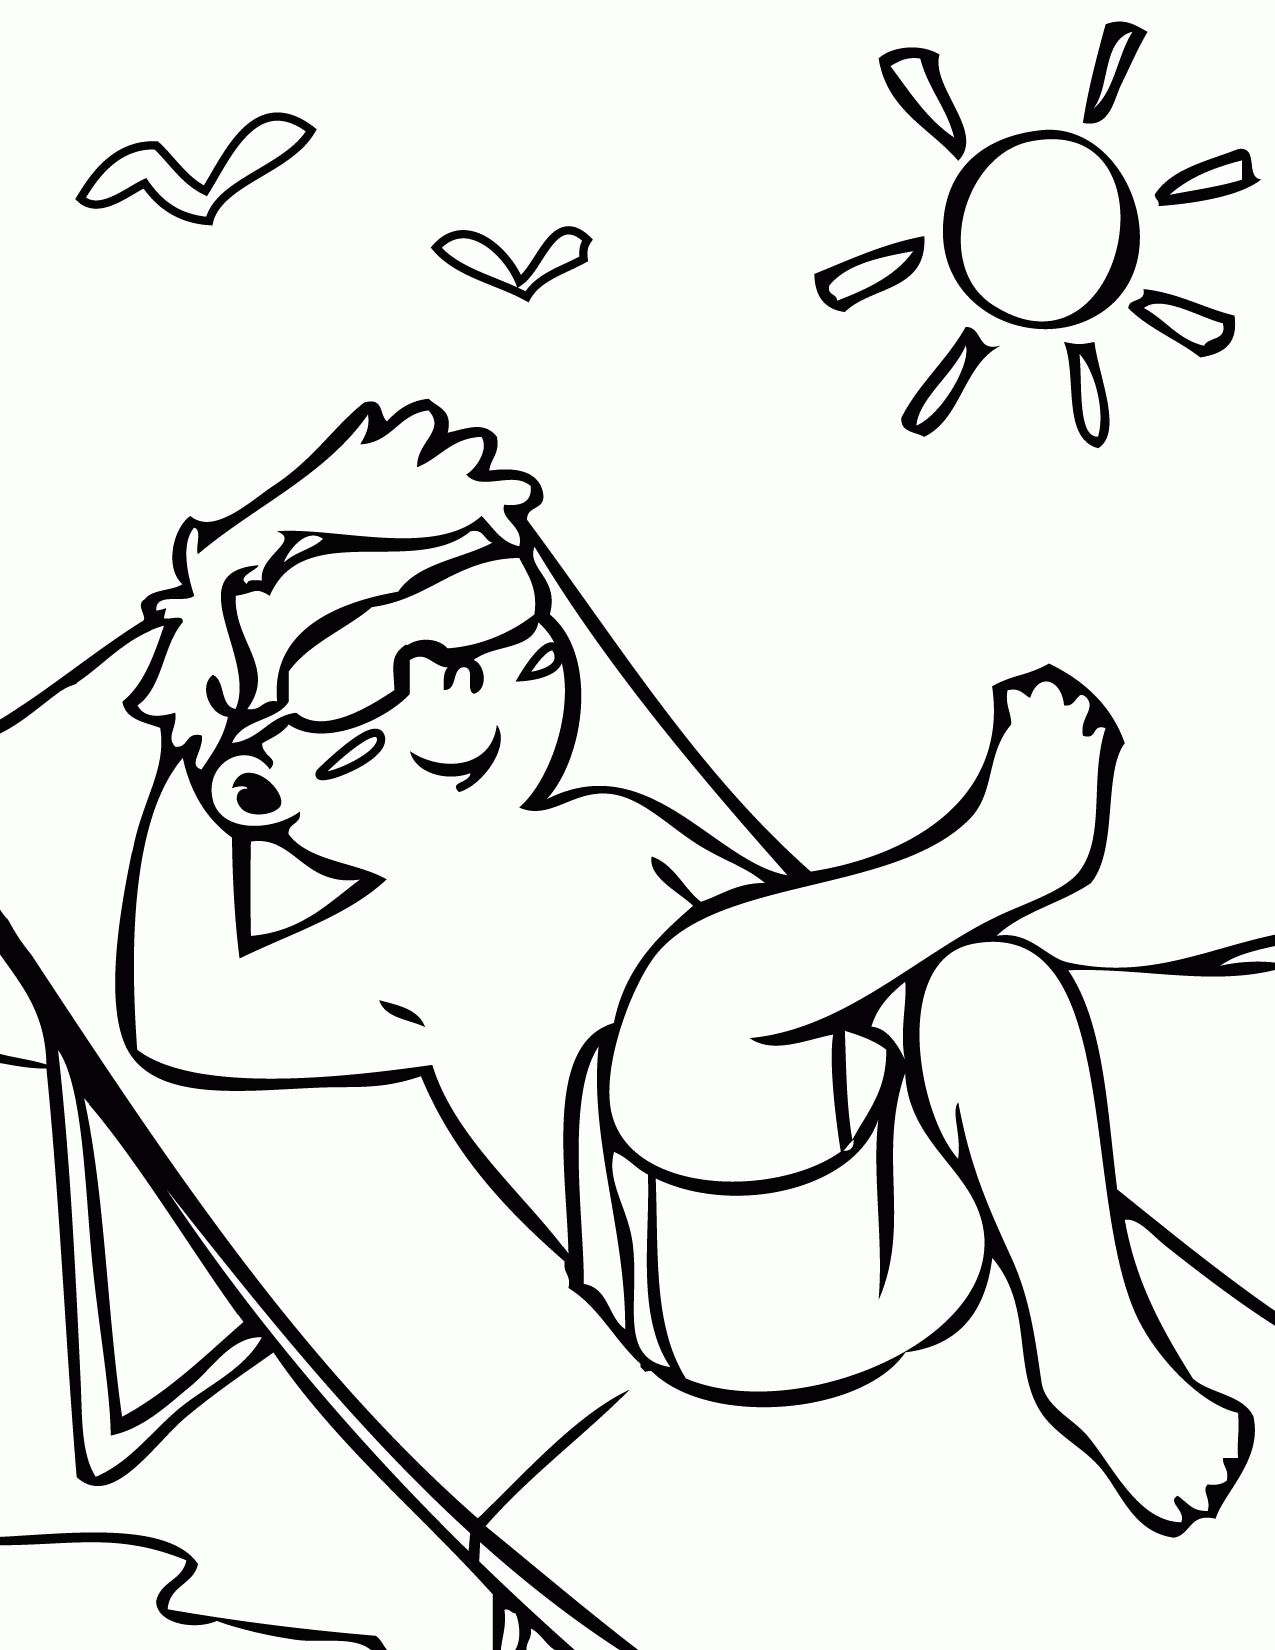 Coloring Page Of A Sun - Coloring Home